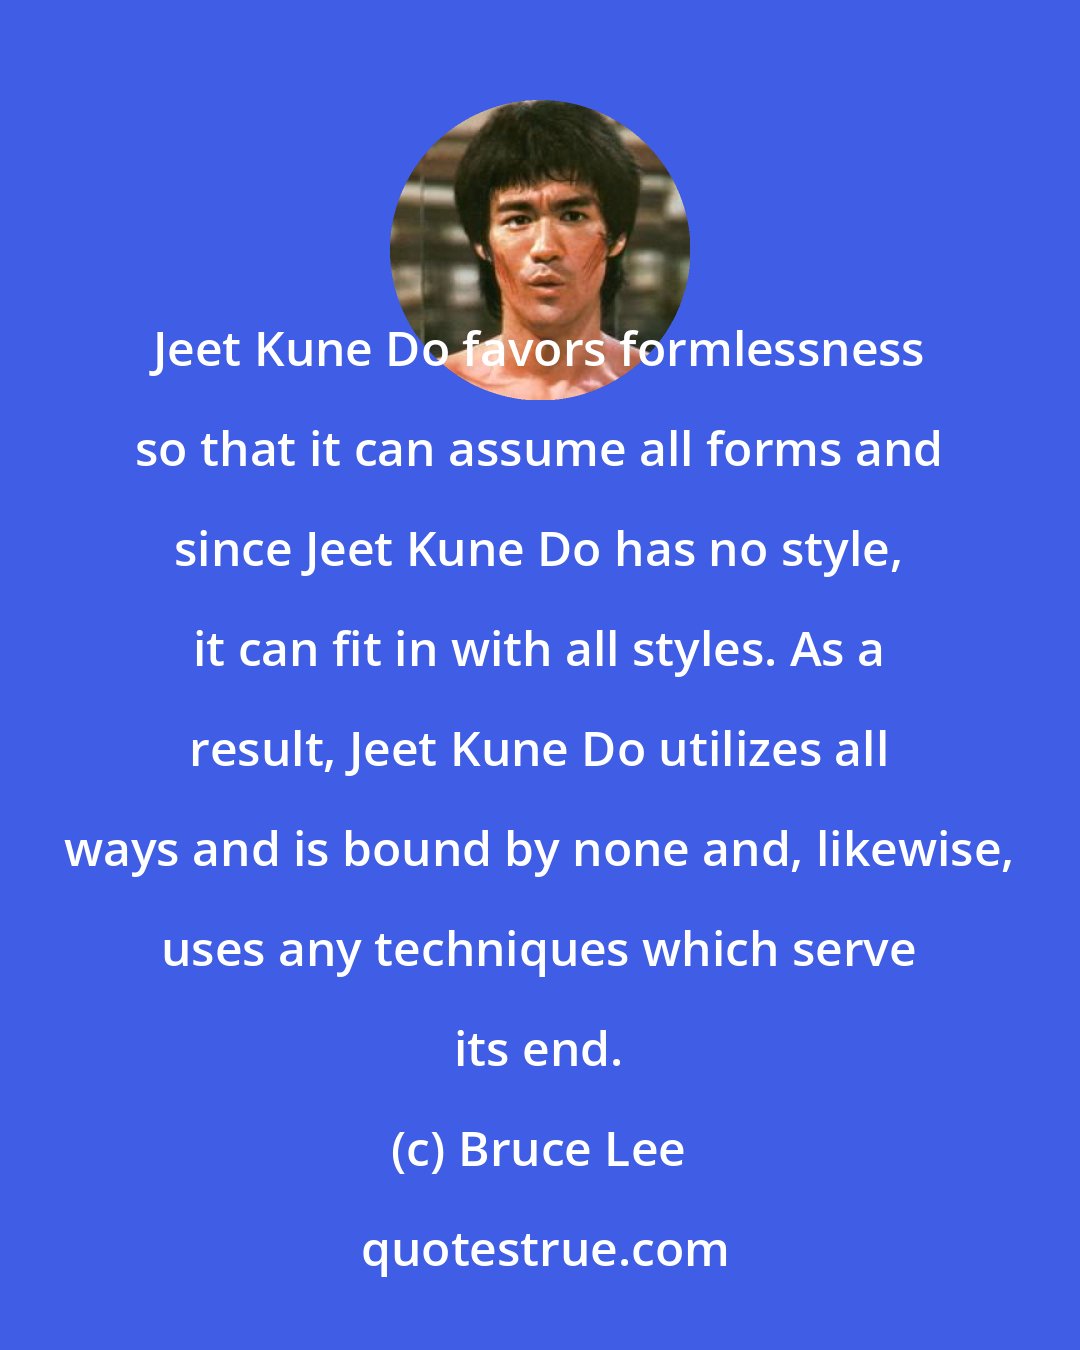 Bruce Lee: Jeet Kune Do favors formlessness so that it can assume all forms and since Jeet Kune Do has no style, it can fit in with all styles. As a result, Jeet Kune Do utilizes all ways and is bound by none and, likewise, uses any techniques which serve its end.